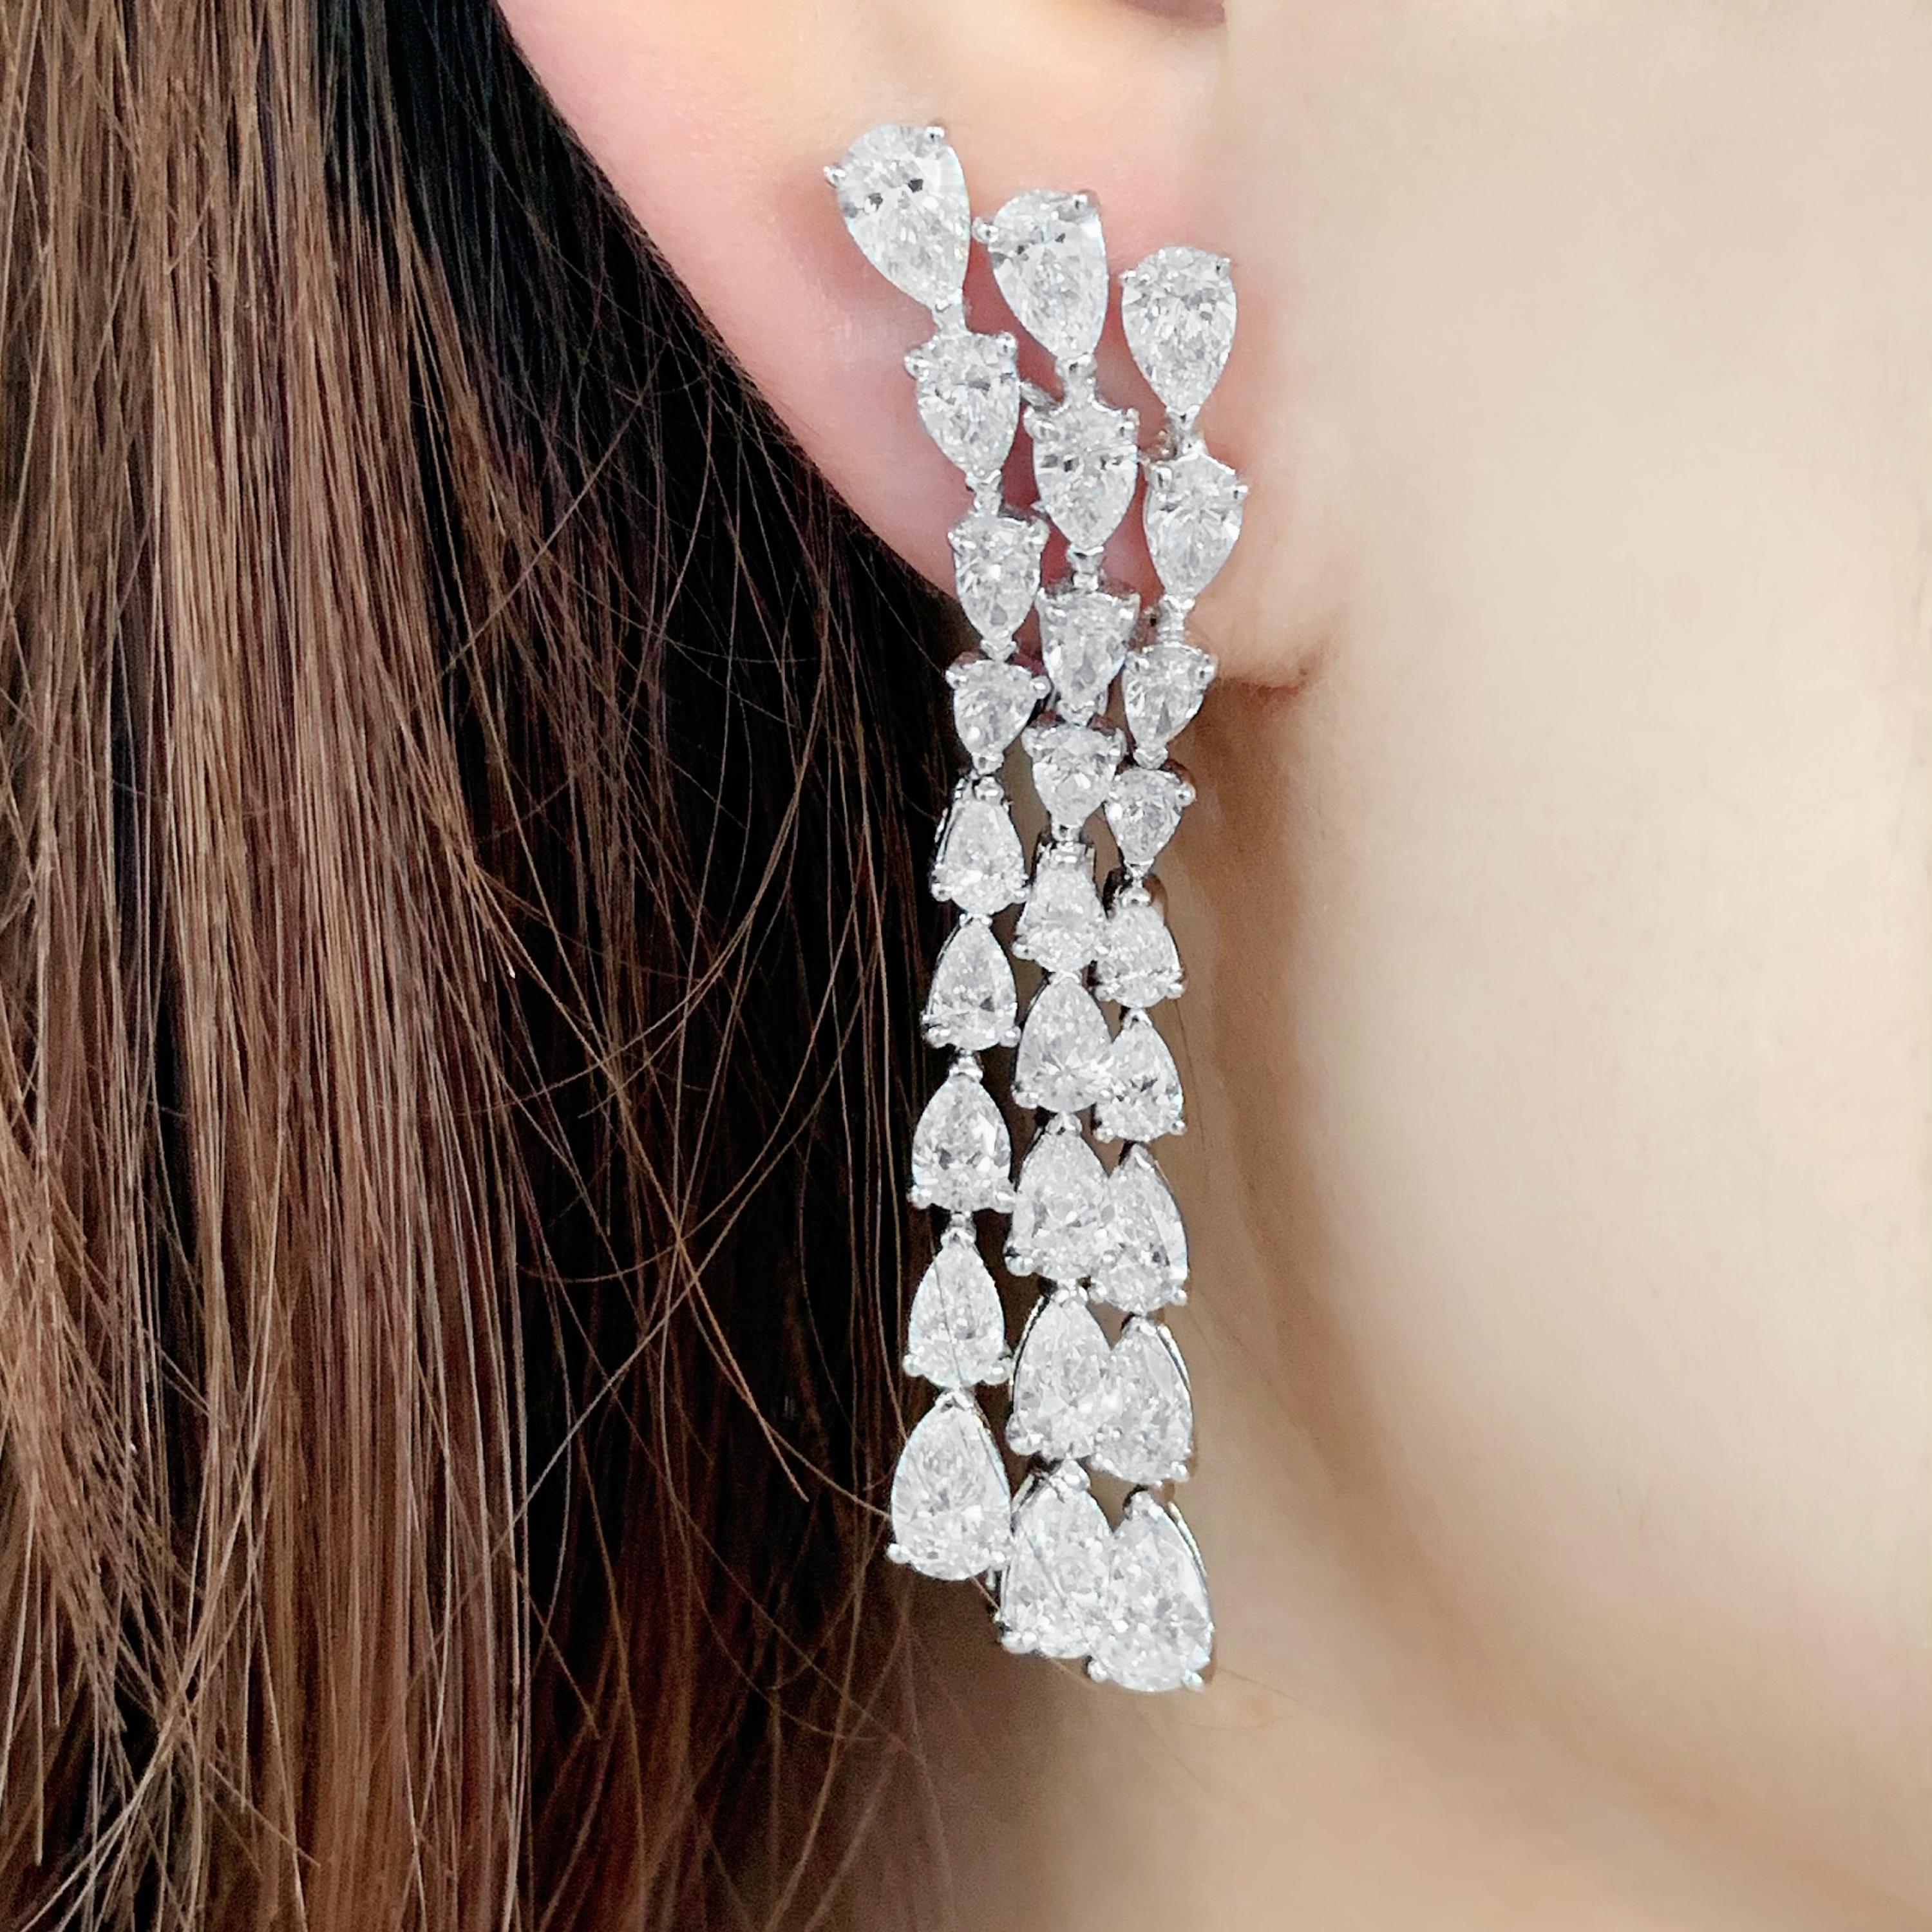 Butani's one-of-a-kind three row diamond chandelier earrings feature a cascade of 54 shimmering pear-cut diamonds totaling 11.0 carats.  Set in 18K white gold.  Show them off with swept-back hair.

Composition: 
18K White Gold 
54 Pear Diamonds: